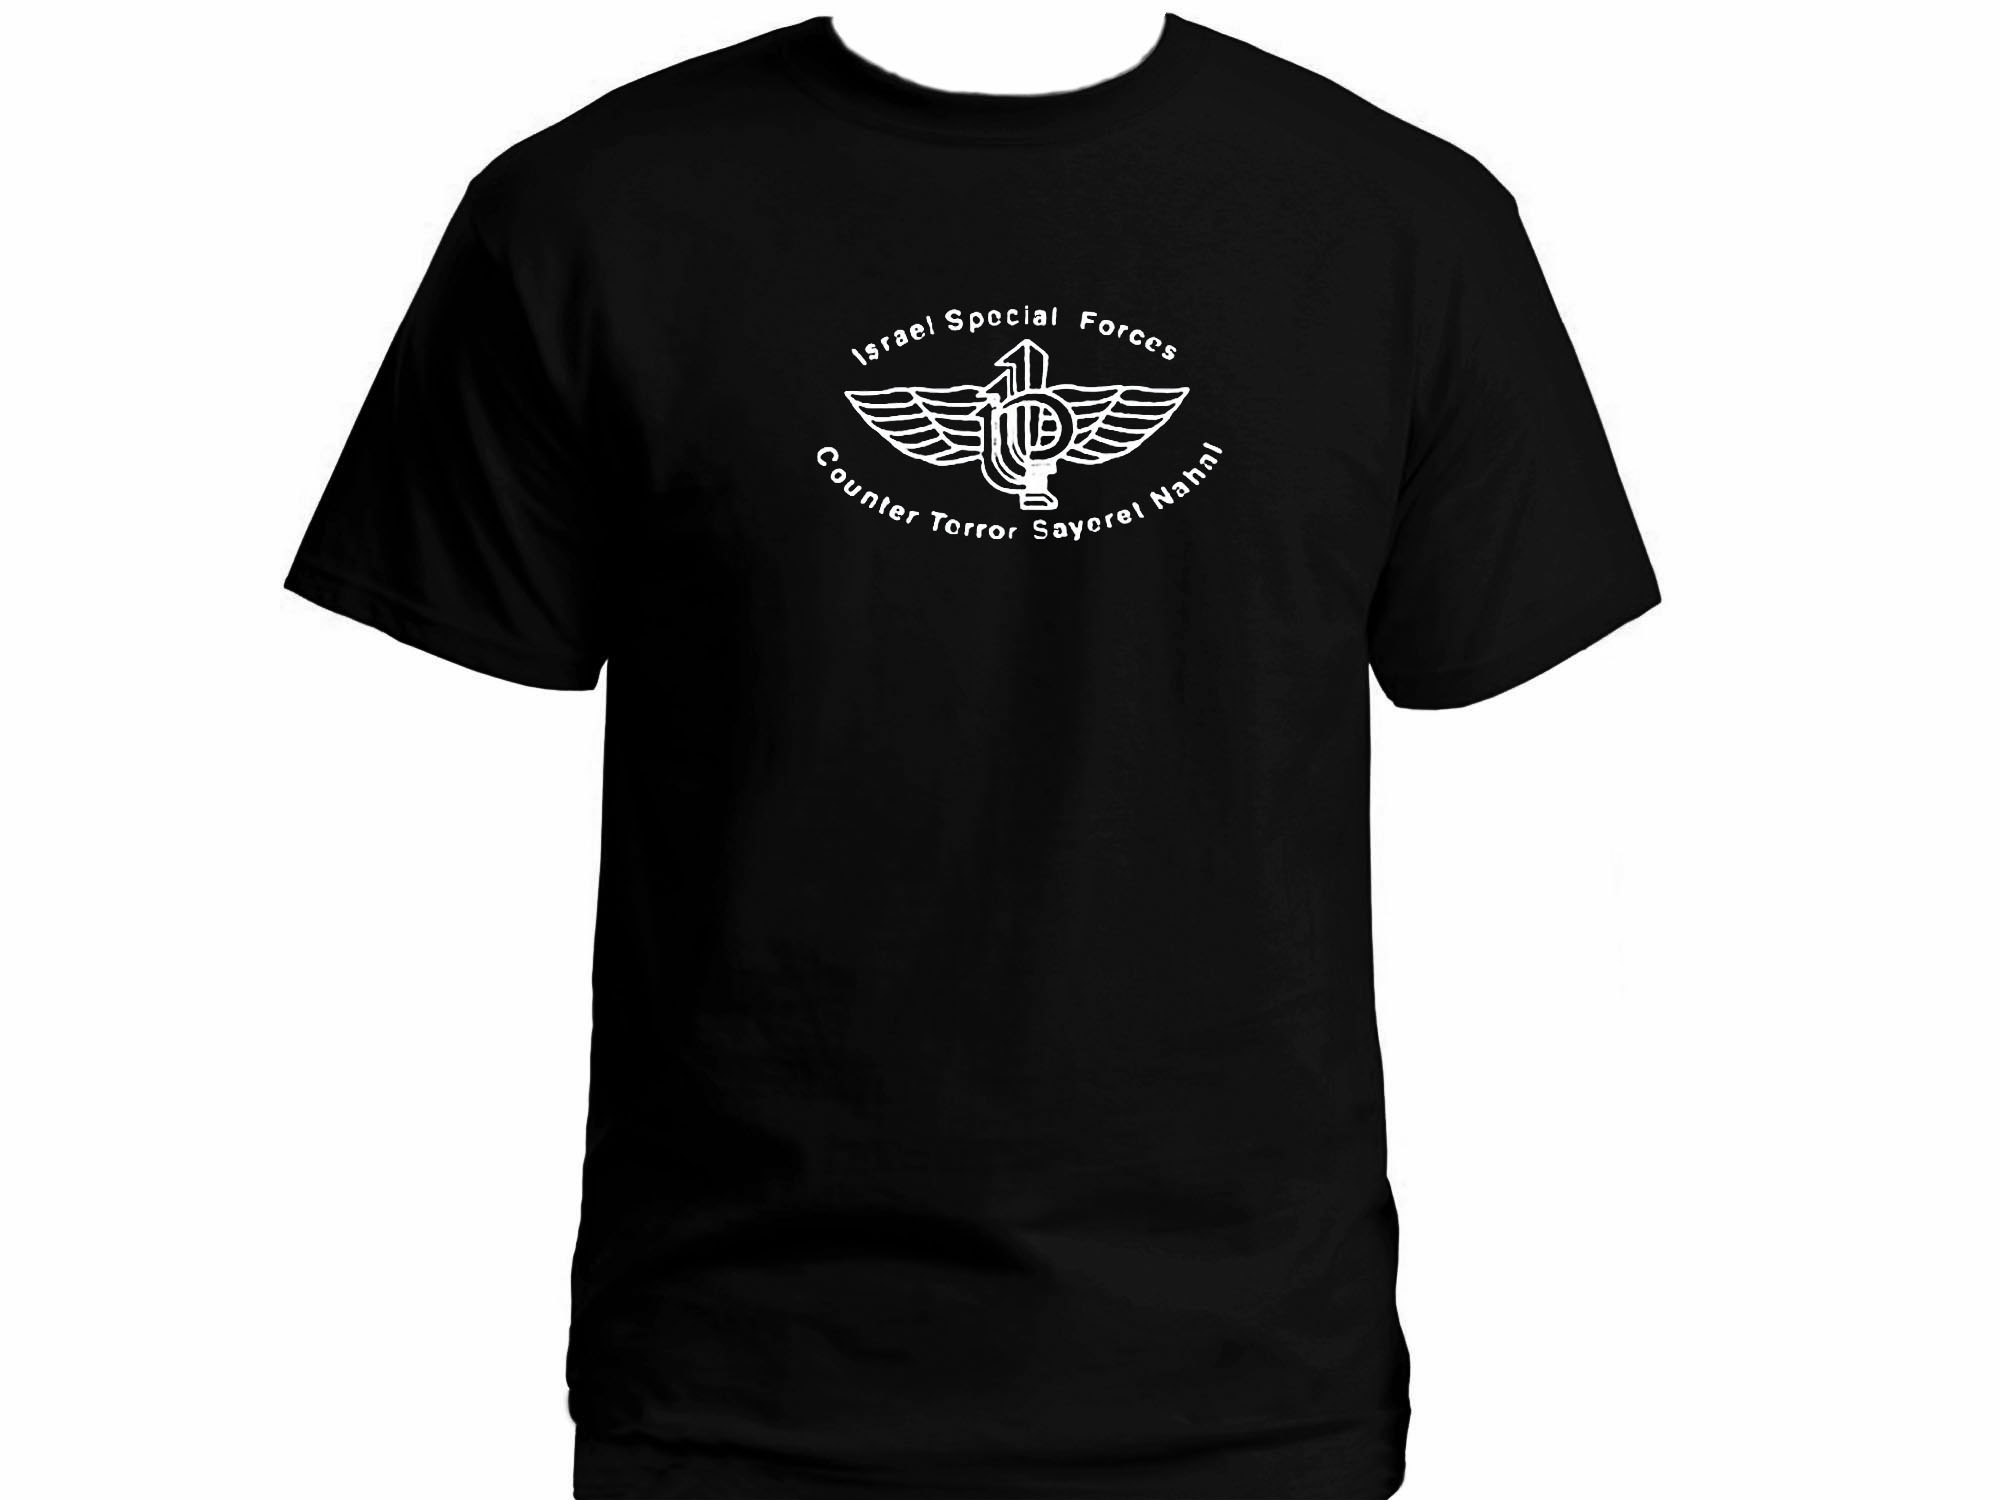 Israel army special forces-sayeret Nahal t-shirt